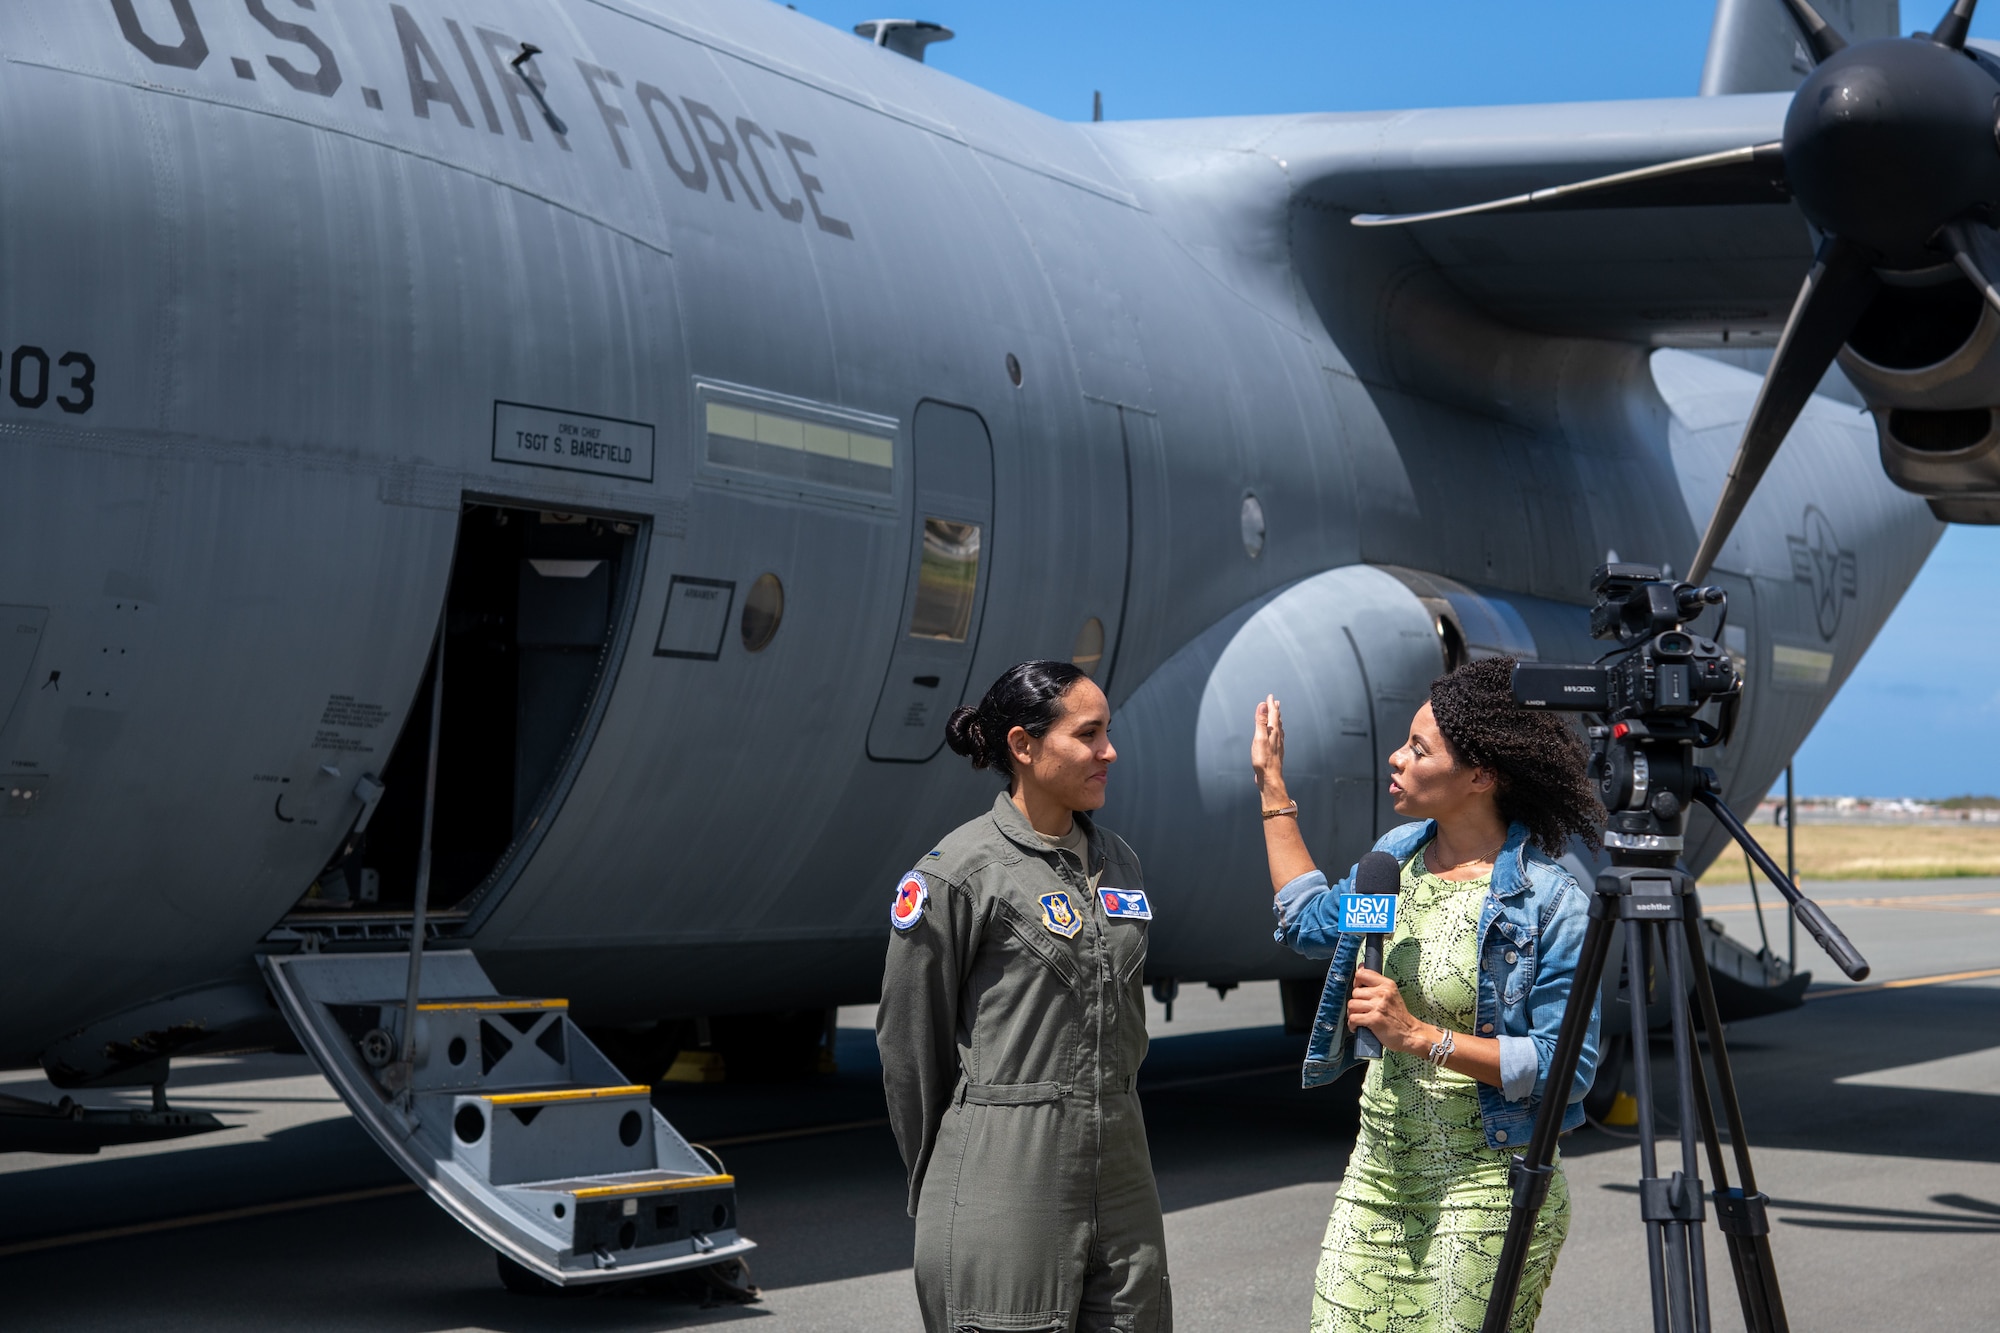 WC-130J in the background. A reporter gestures to the aircraft while talking to Lt. Cotto.